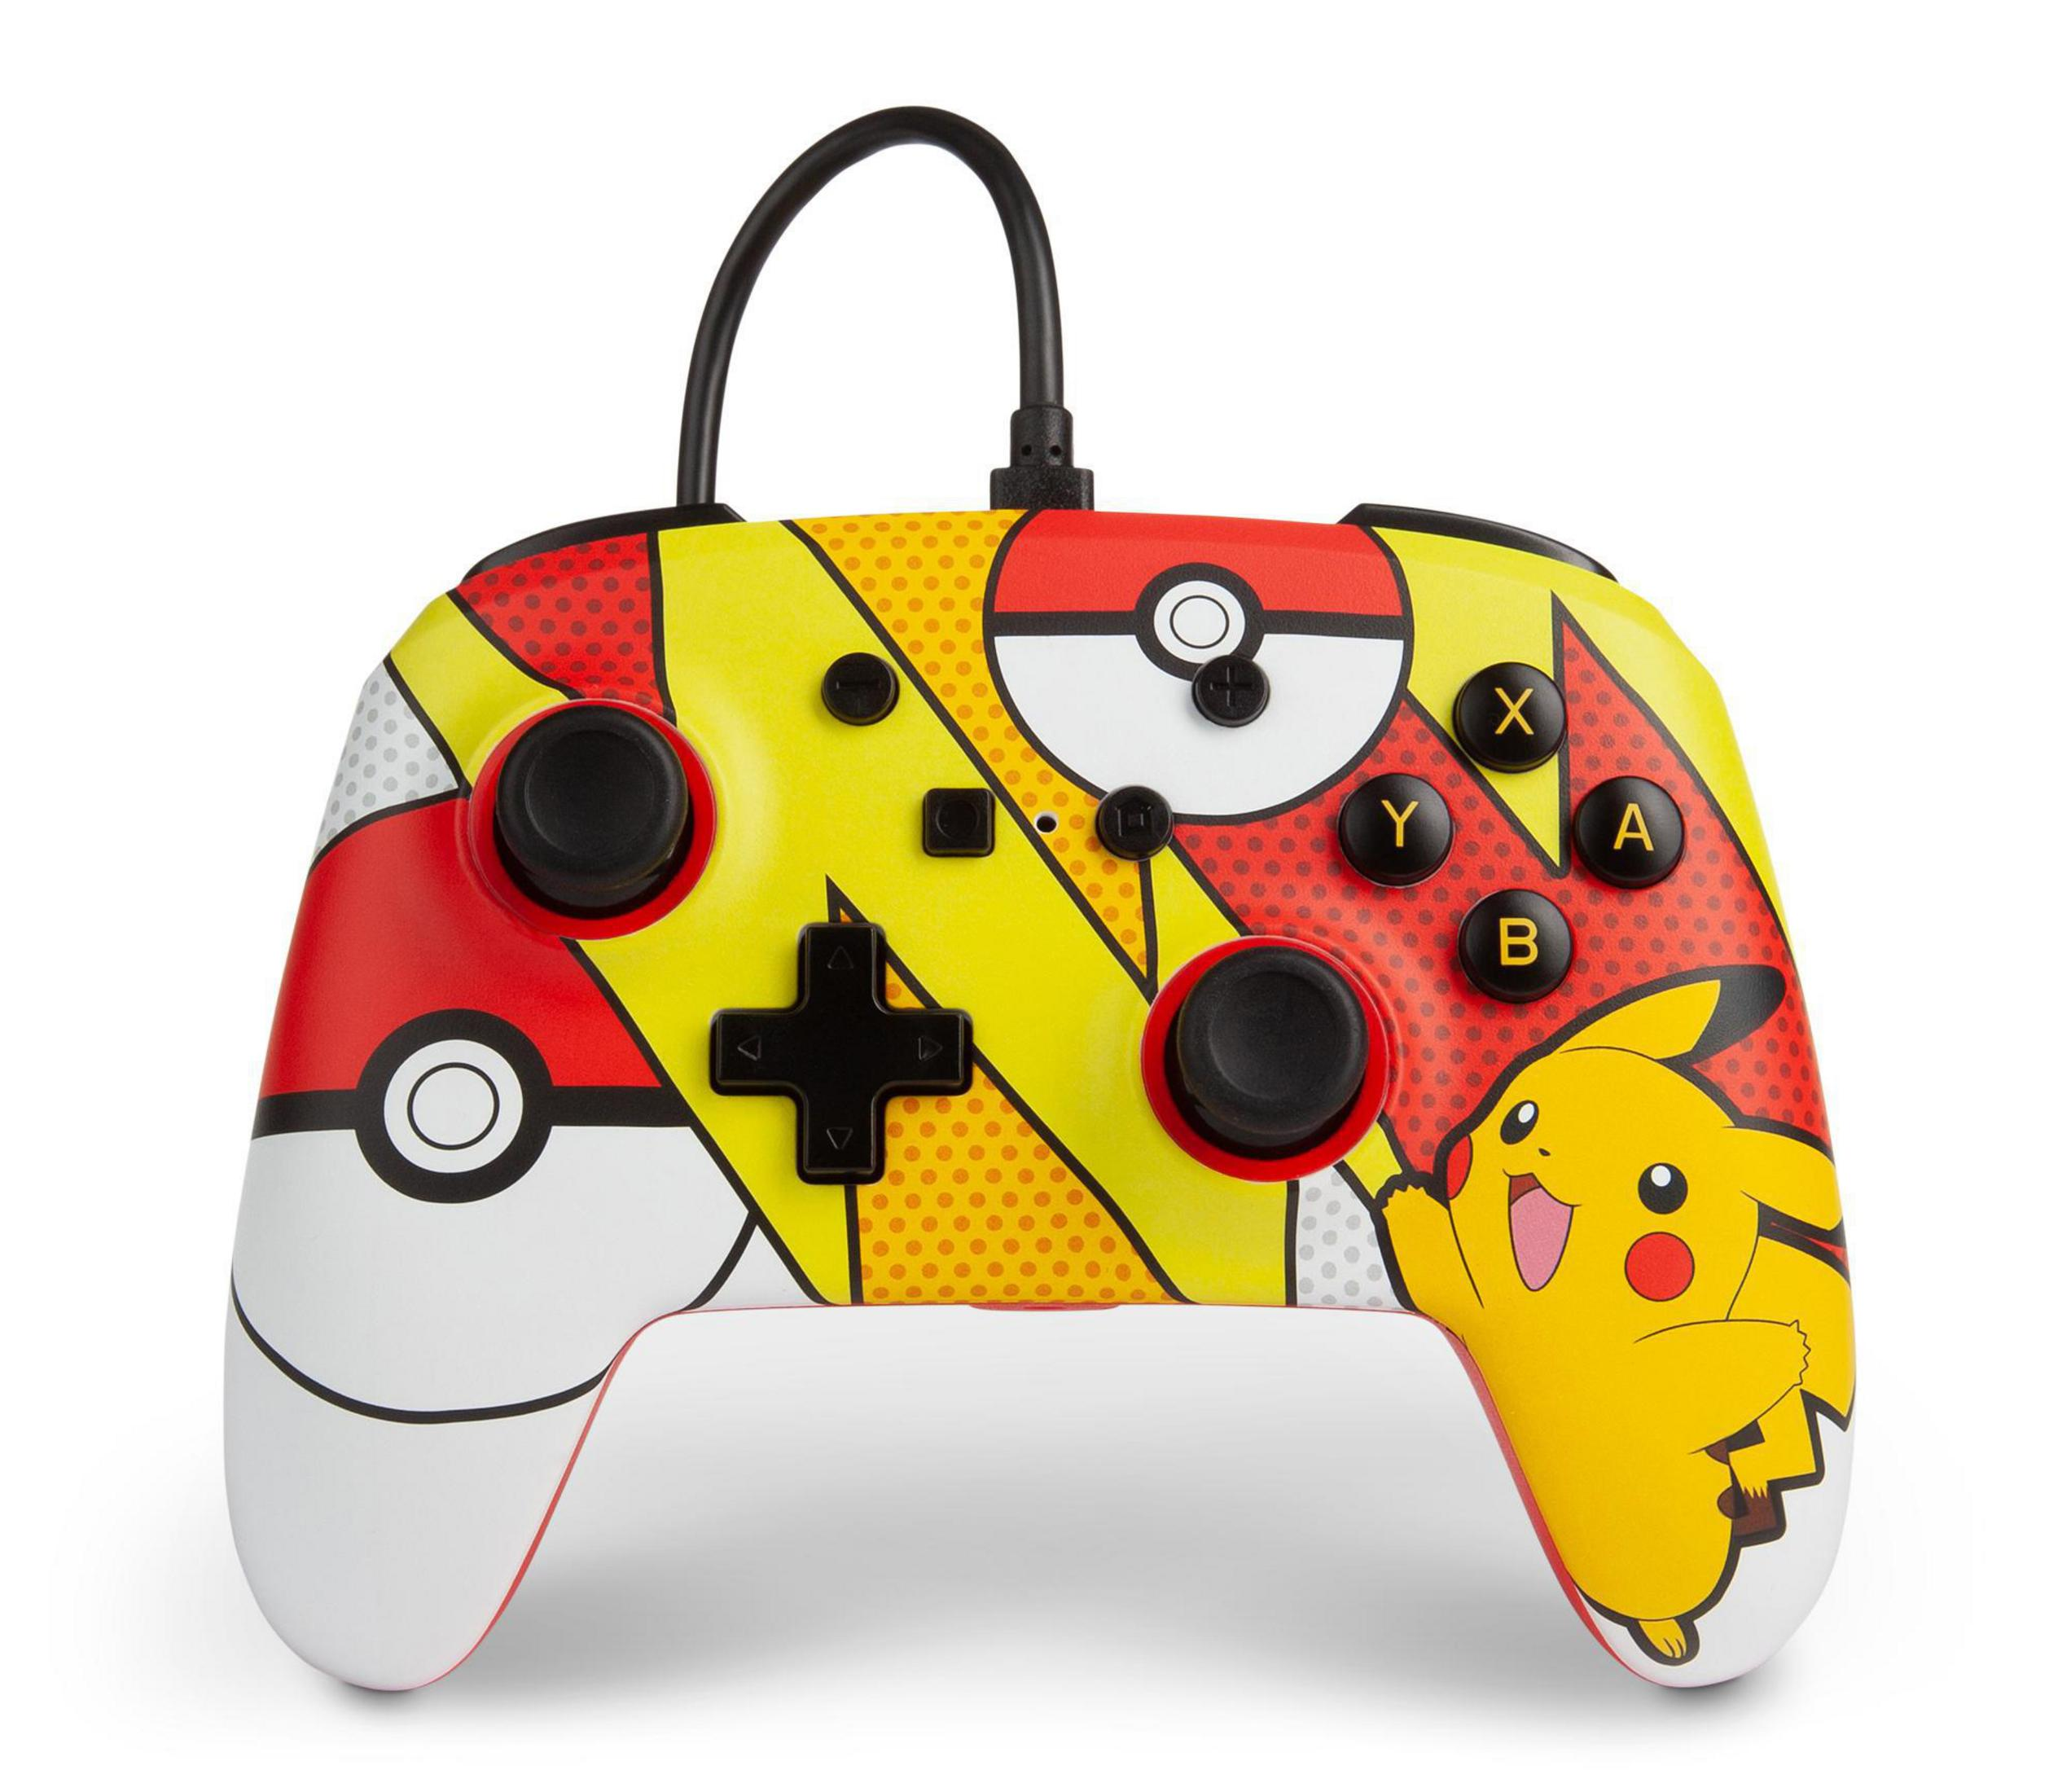 PIKACHU A CONTROLLER POPART Controller PA1518905-01 NSW Rot/Gelb WIRED POWER